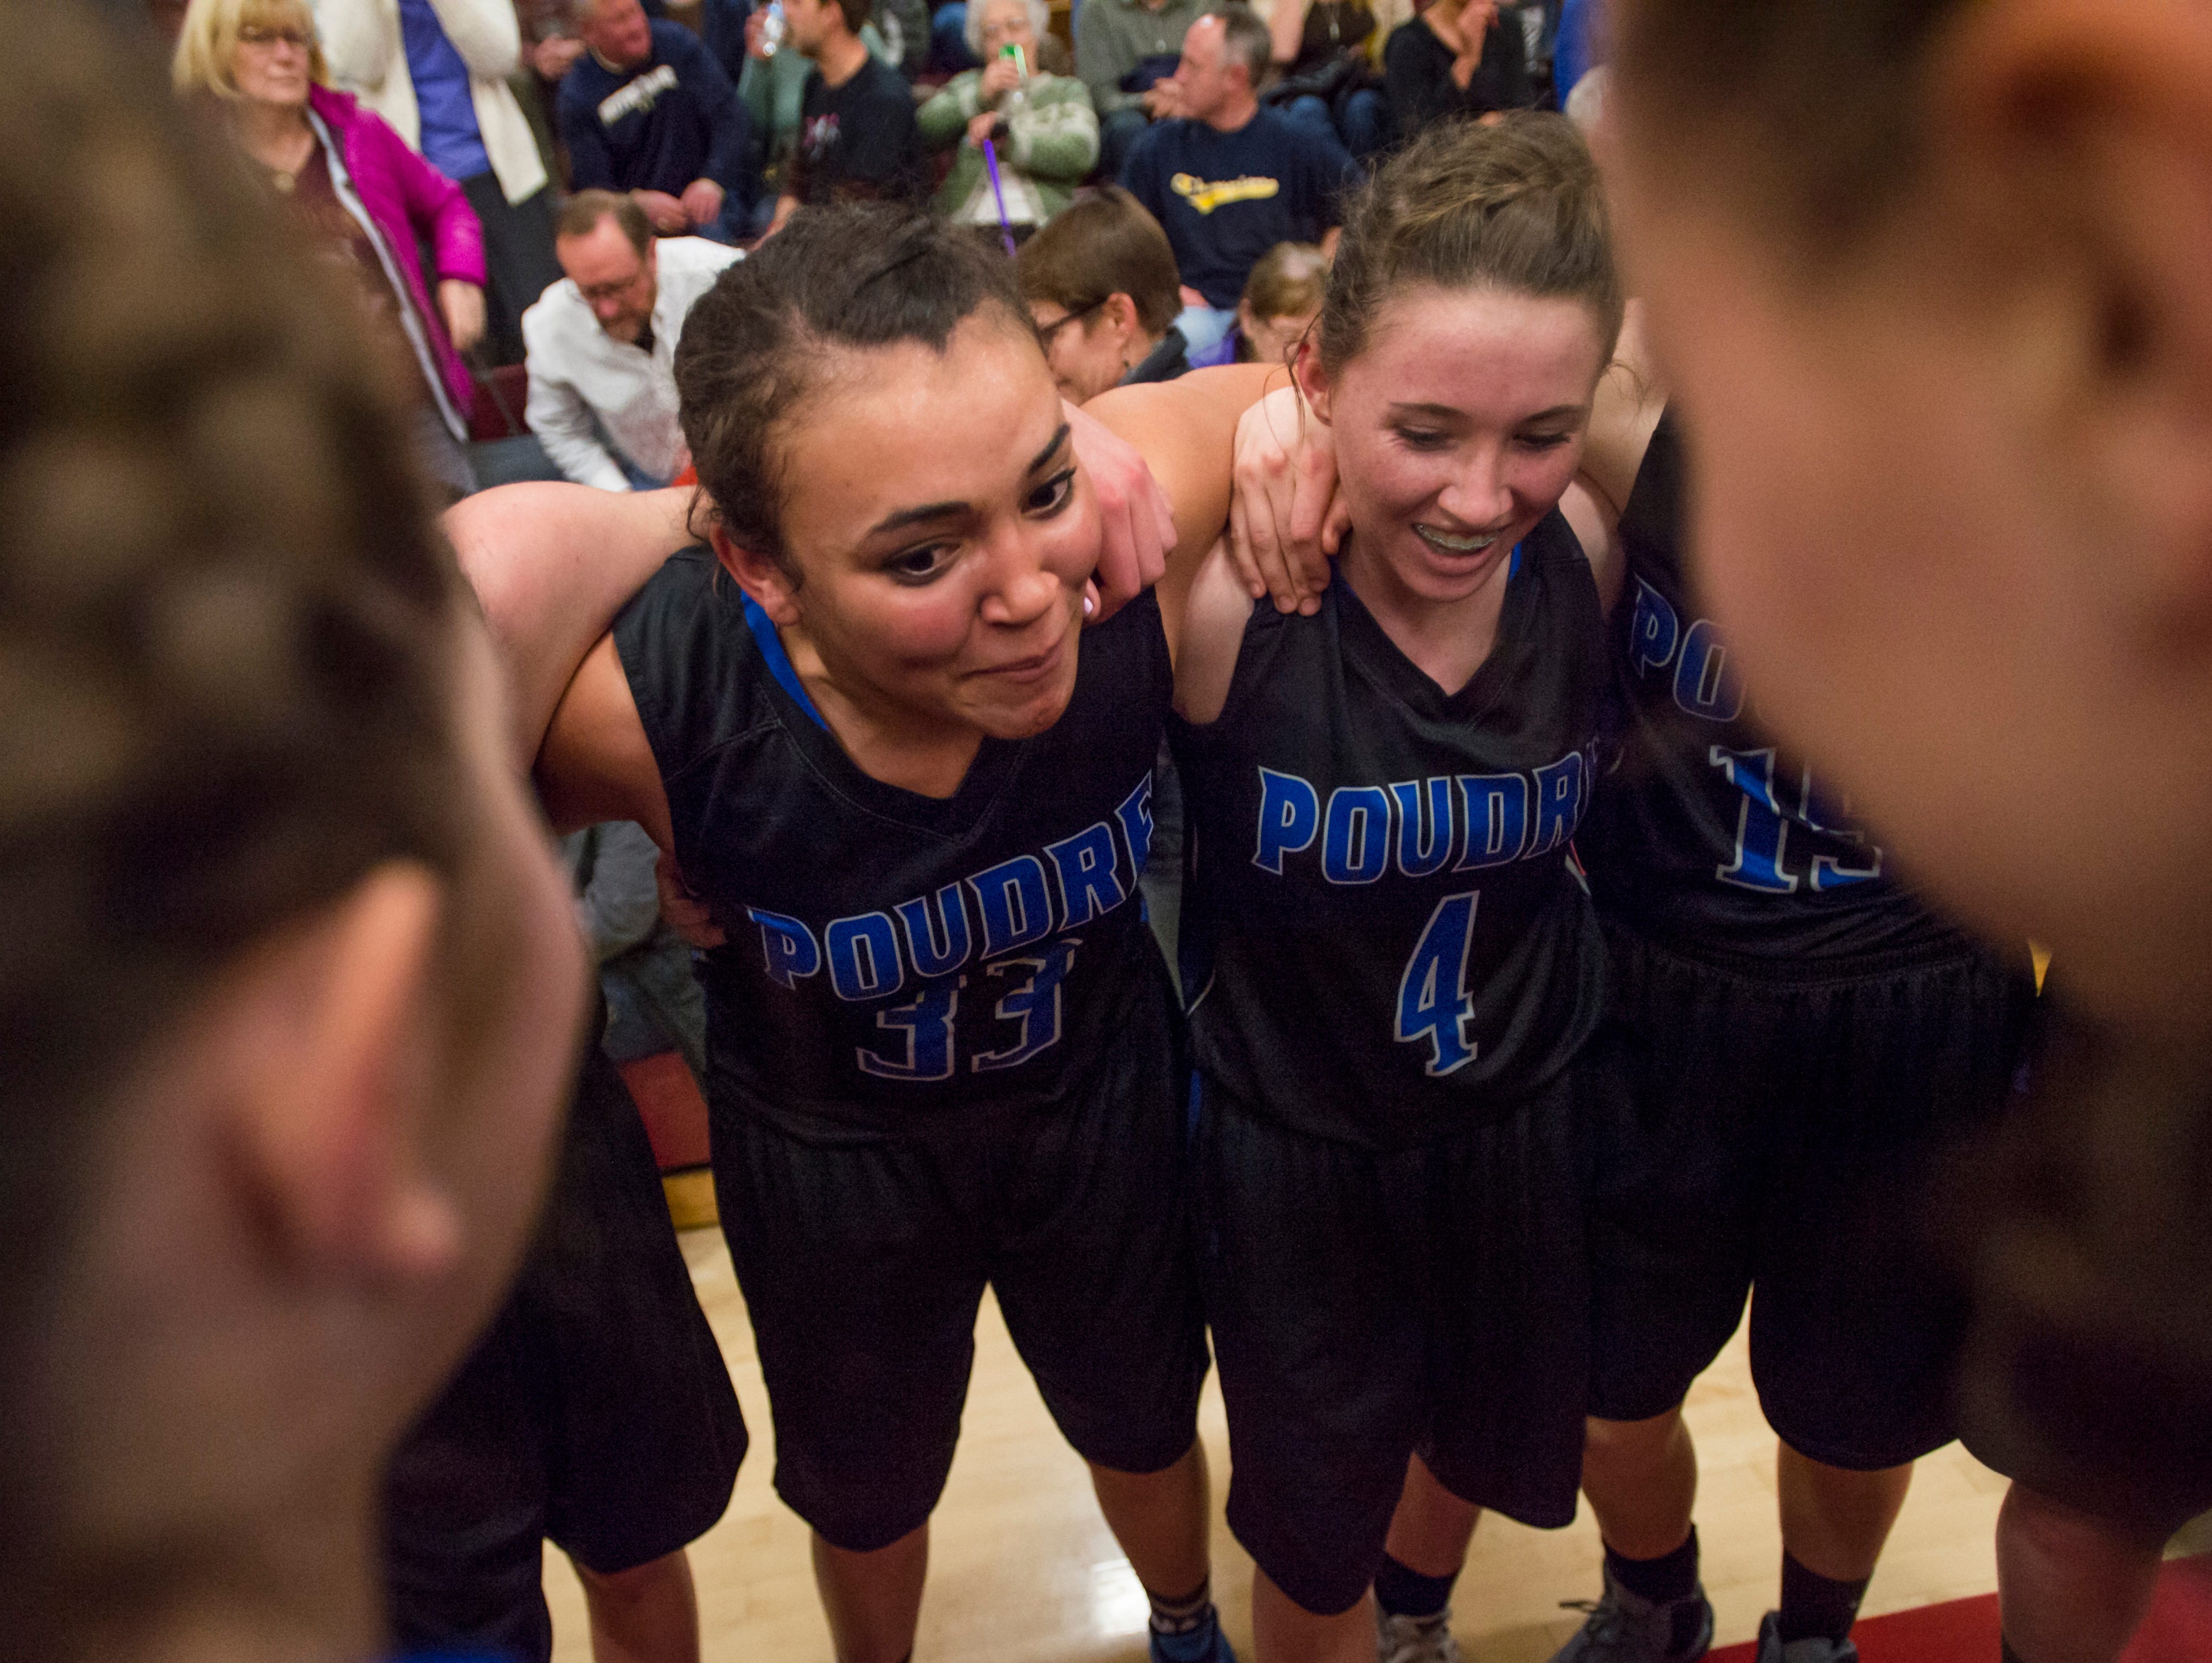 The Poudre High School girl's basketball team celebrates a 47-34 win over Rocky Mountain High School on Tuesday, January 26, 2016, in this file photo. The Impalas knocked off crosstown foe Fossil Ridge on Monday.